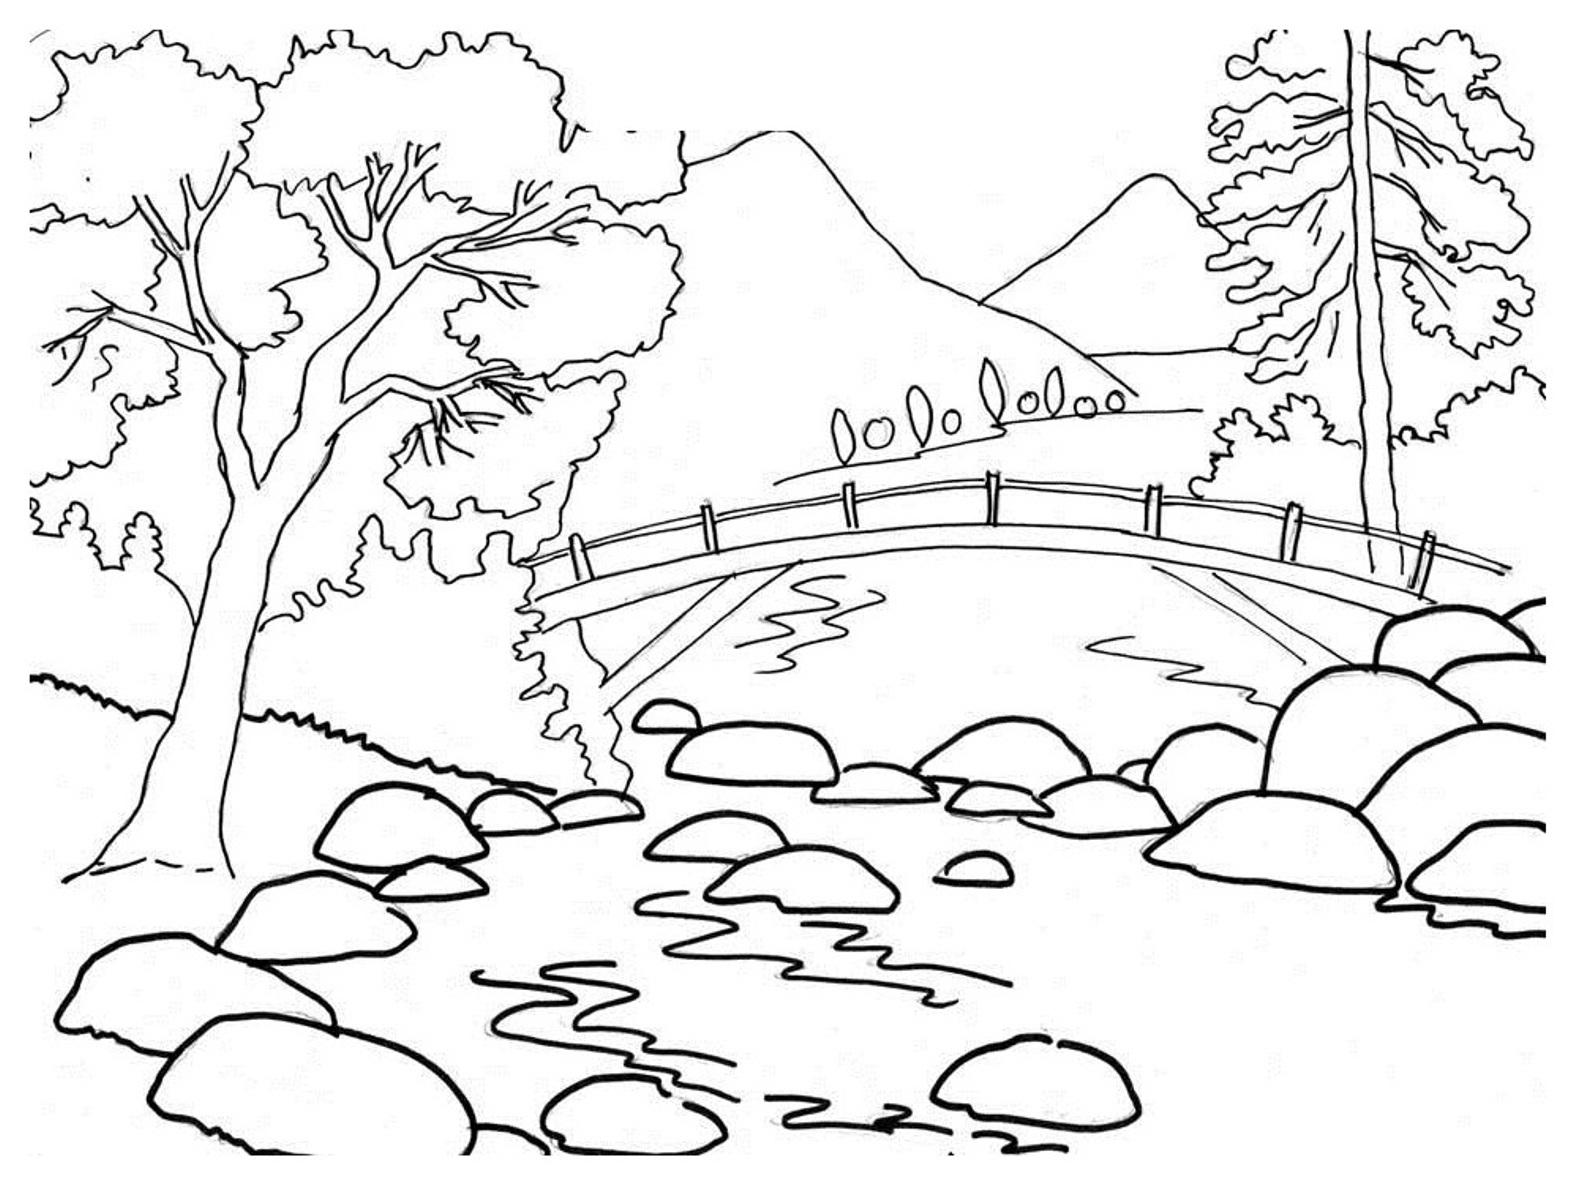 Coloring Pages For Adults Nature on Coloring Pages Design Ideas ...